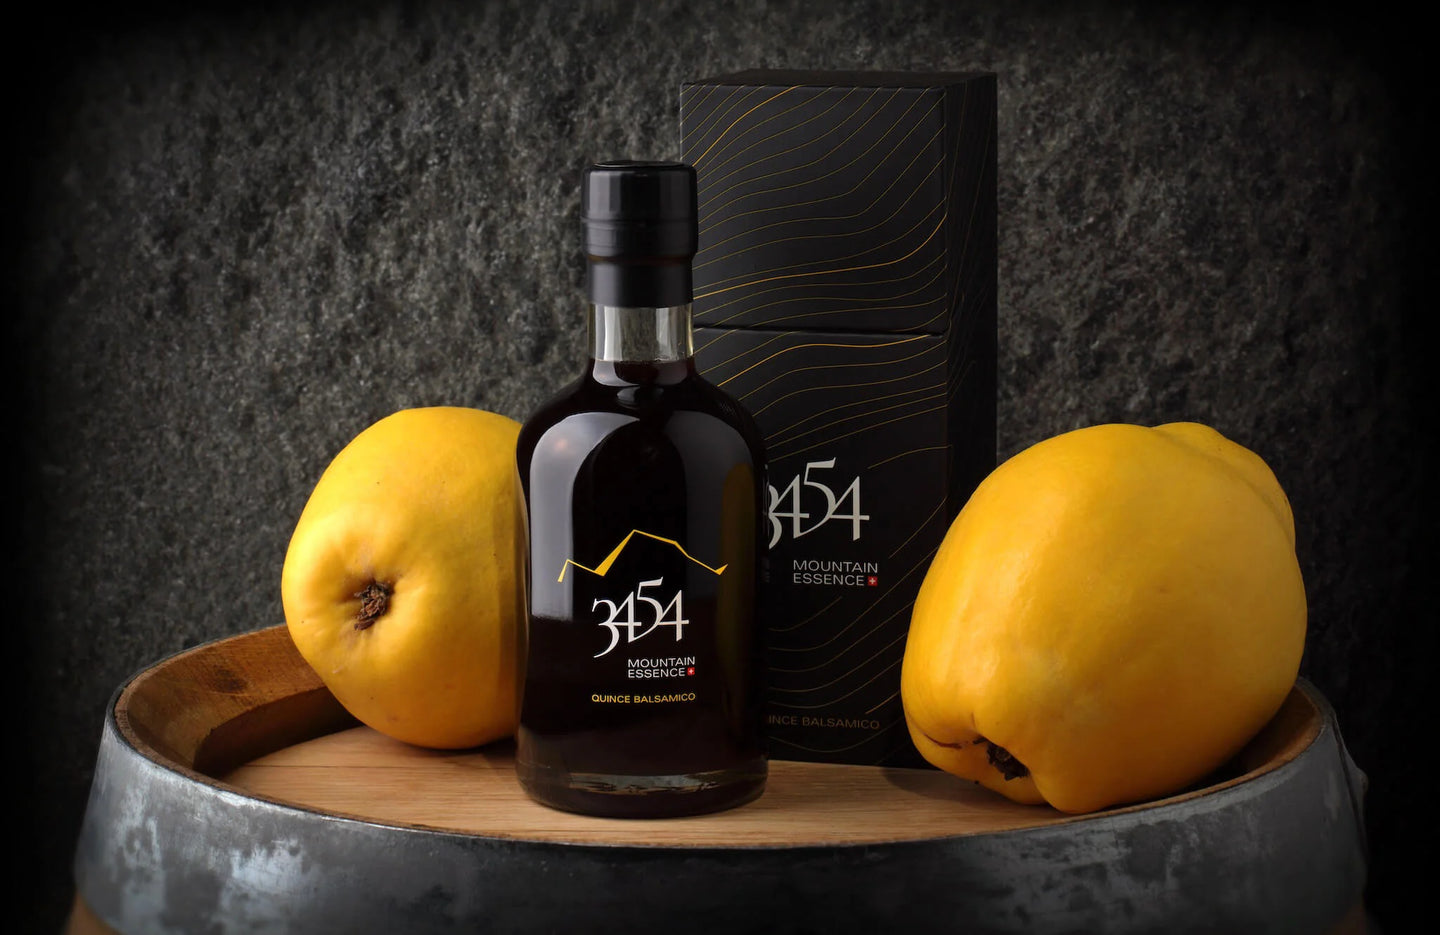 Quince Balsamico